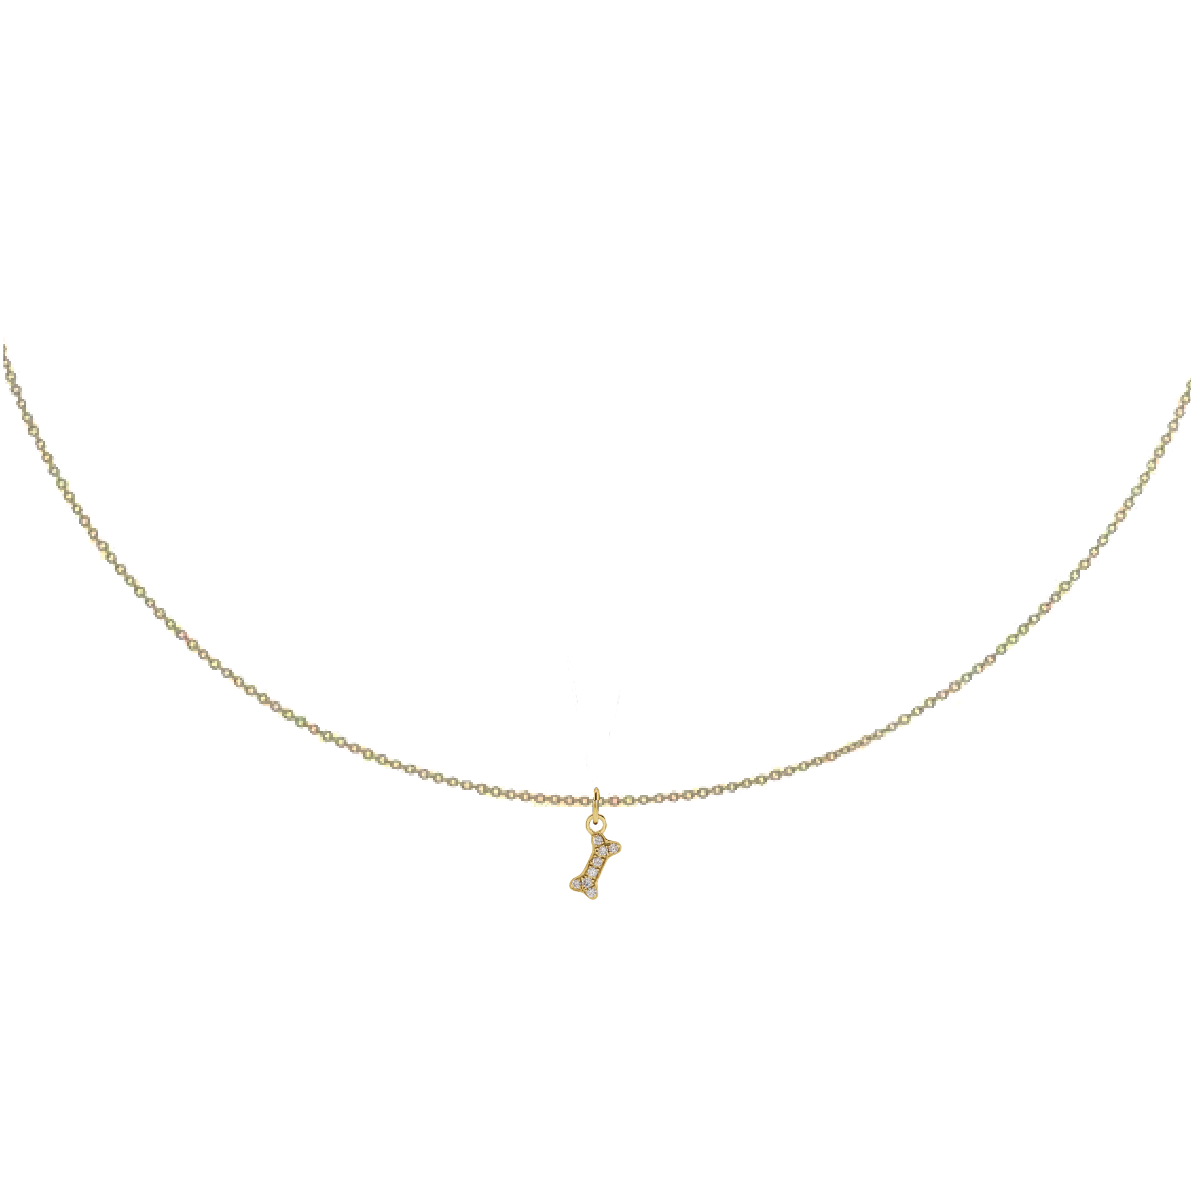 Charm Collection - For the Dog Lover Robyn Canady Charm + 14K Gold Filled Chain None 